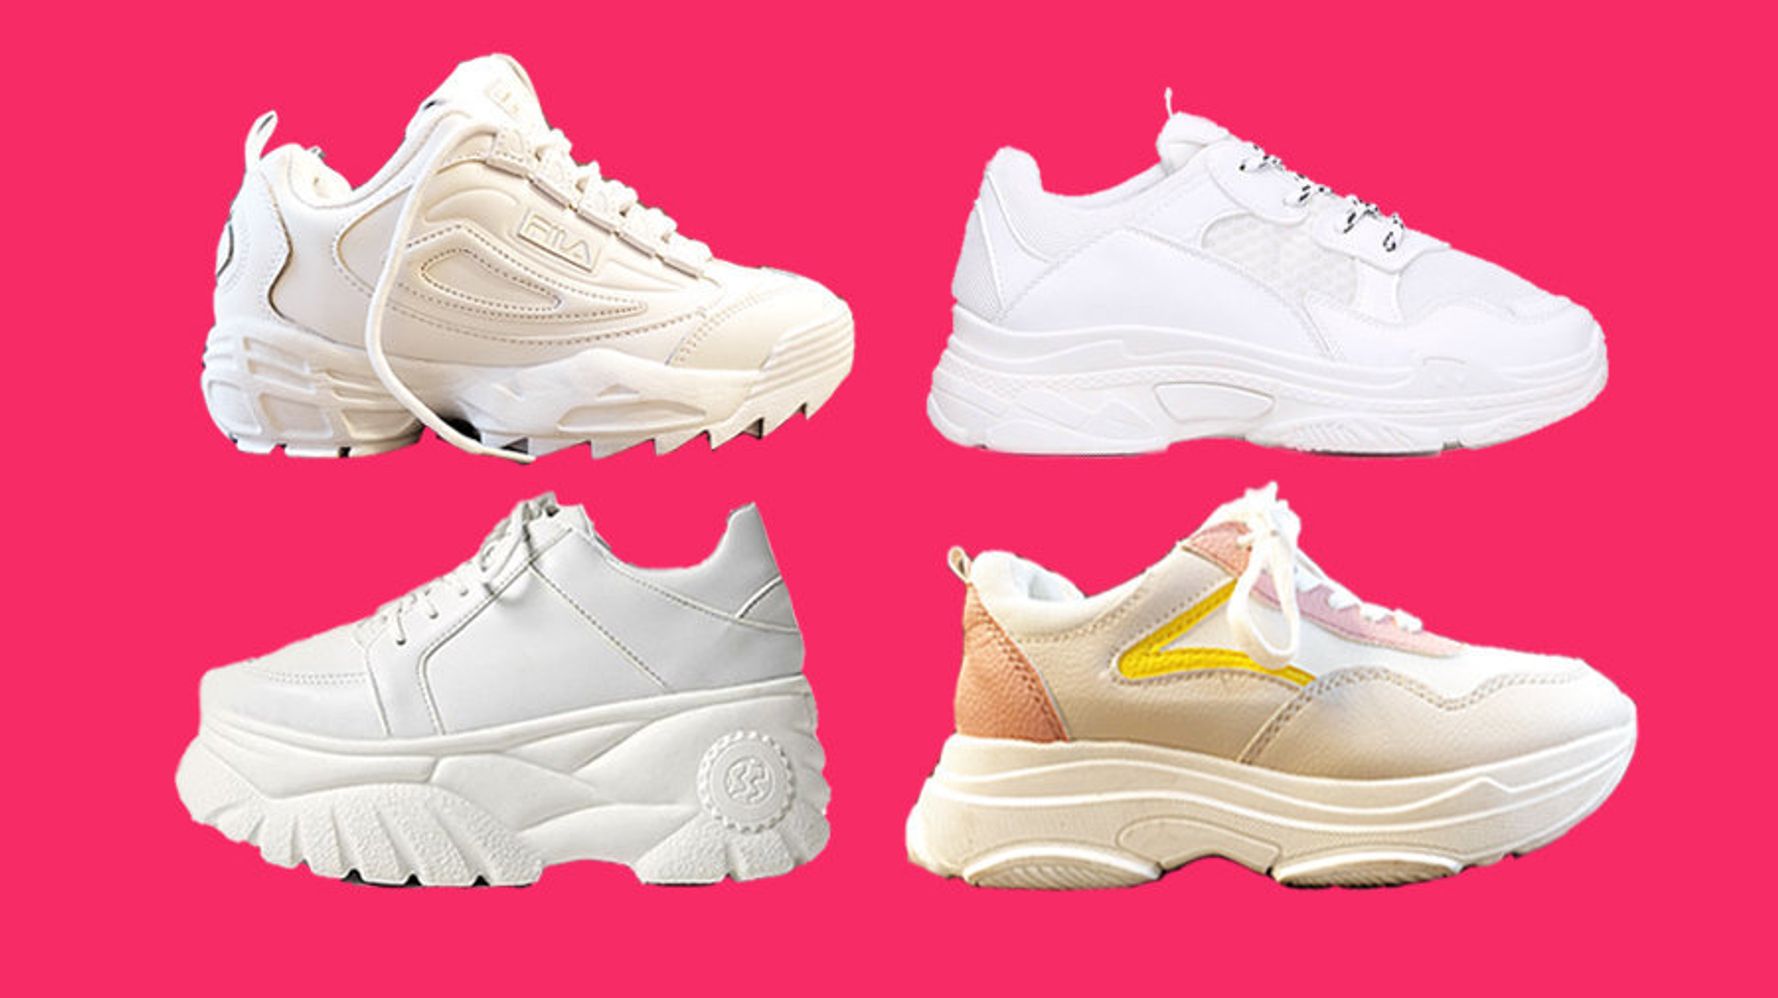 What is an Alternative to Fila Shoes?